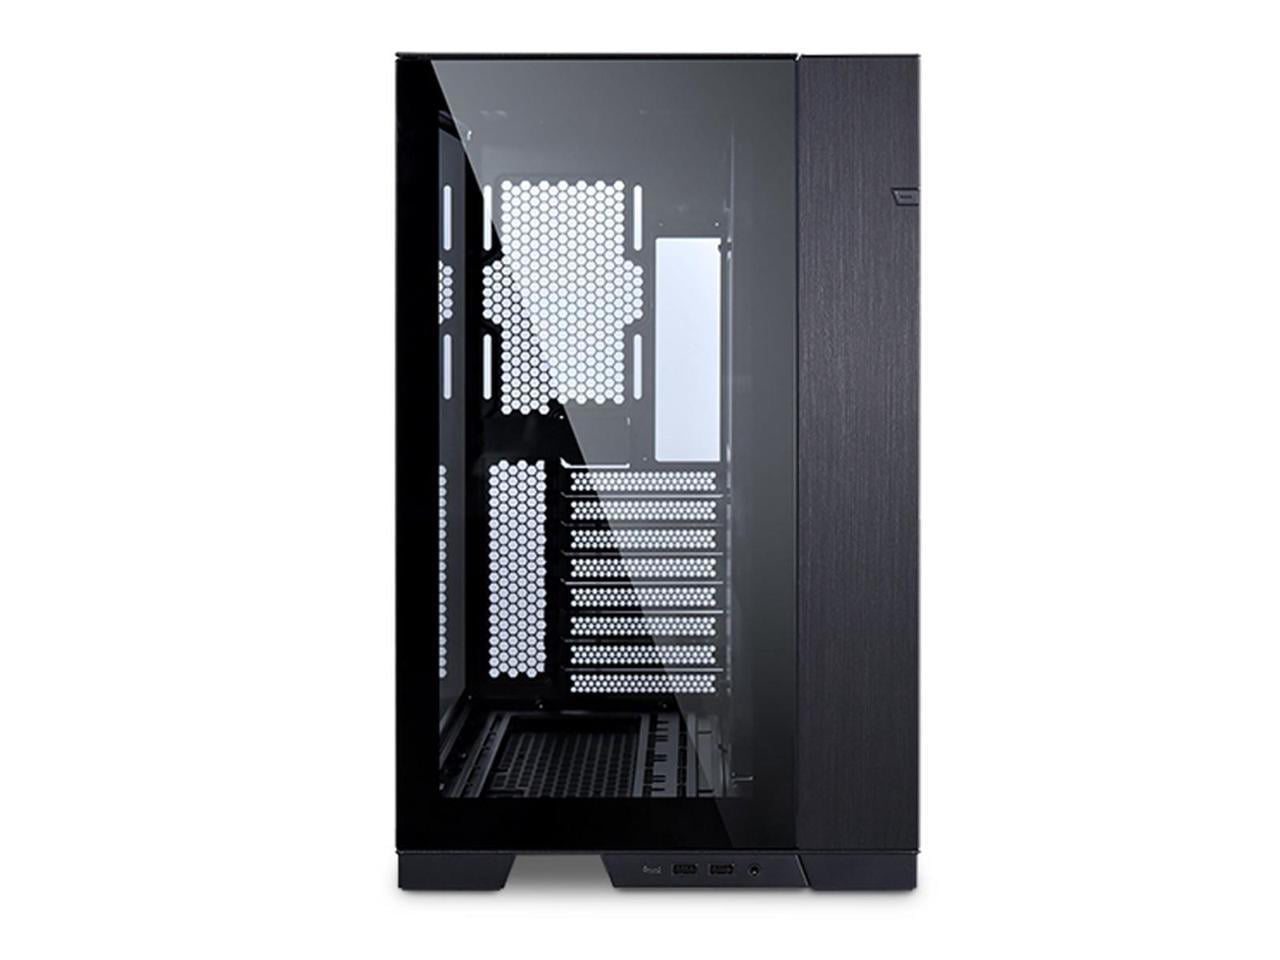 LIAN LI O11 Dynamic Computer Case Support E-ATX/ATX/M-ATX/ITX Motherboard  Mid-Tower Tempered Glass Chassis Black/White/Silver - AliExpress